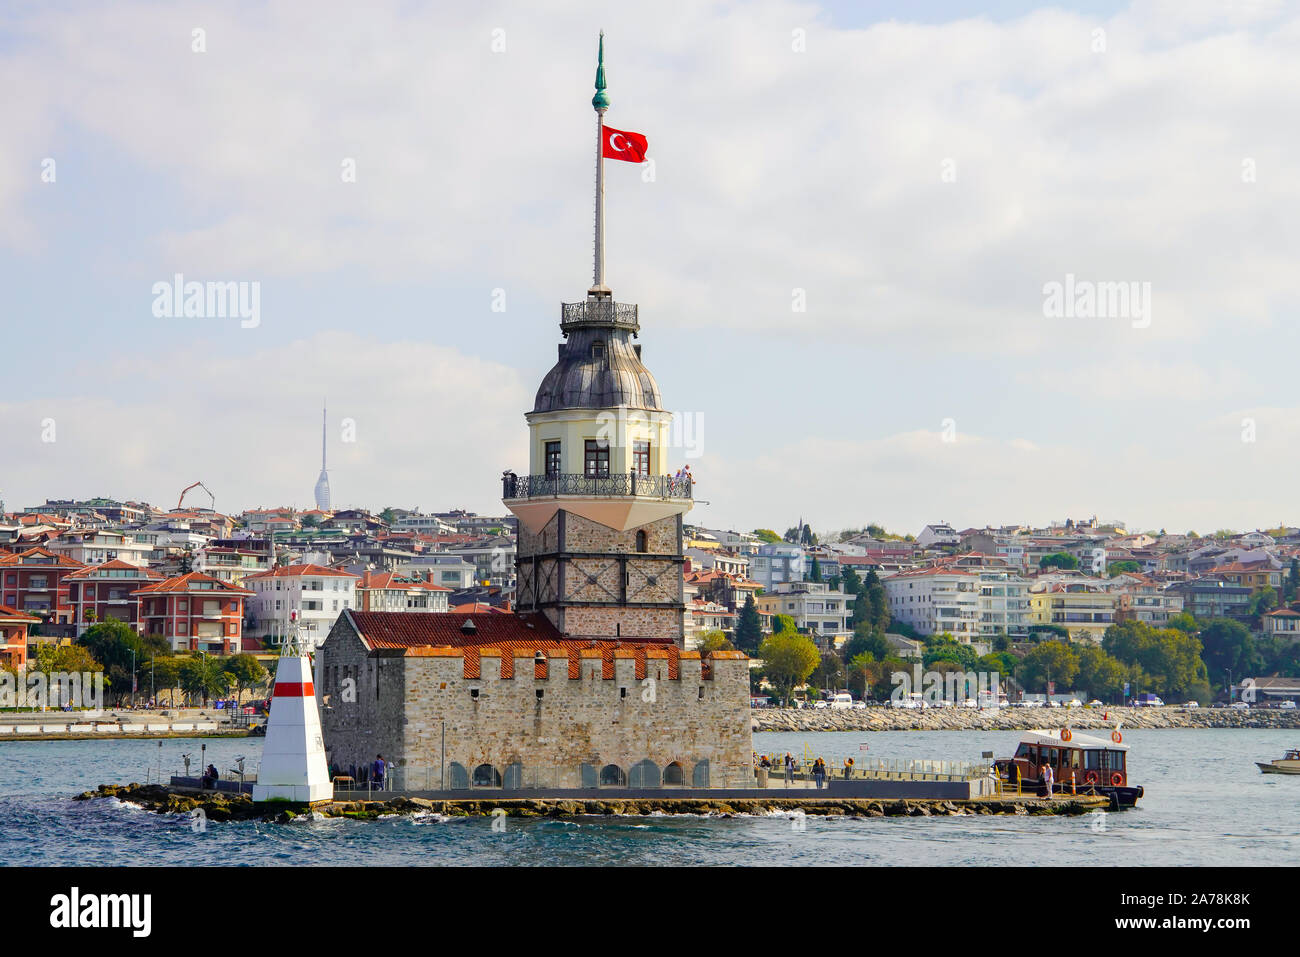 The Maiden’s Tower is a quaint tower in Bosphorus strait off of the coast of Istanbul, Turkey. Stock Photo